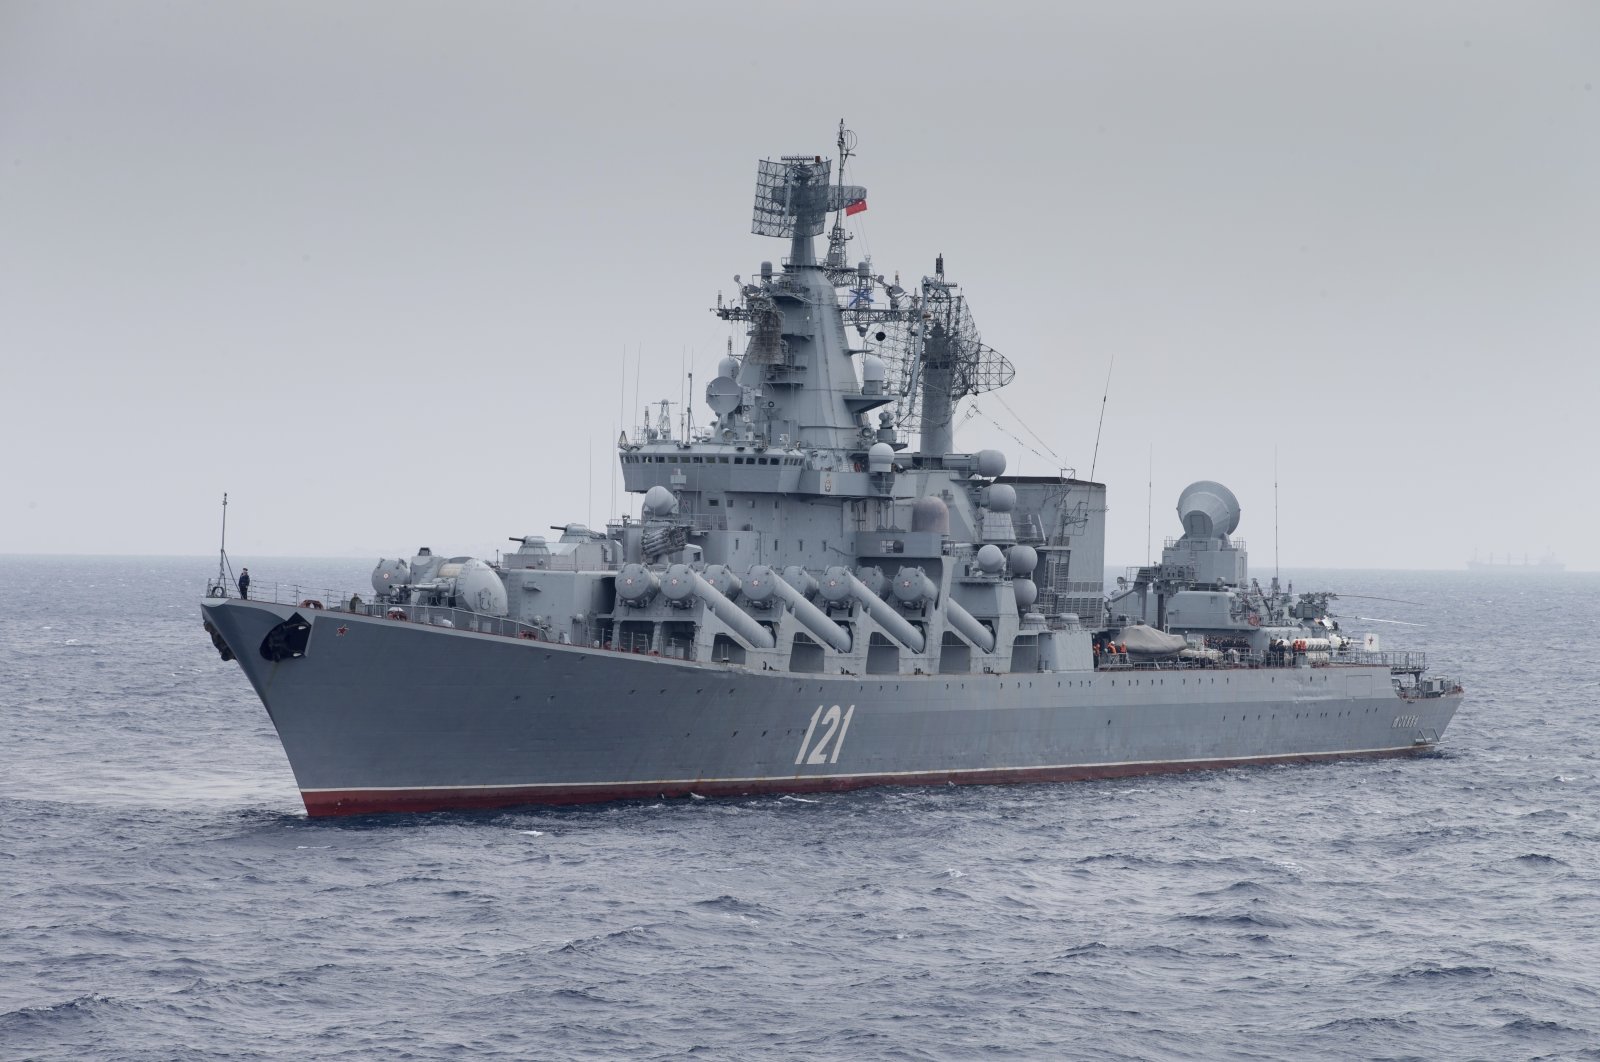 In this photo provided by the Russian Defense Ministry Press Service, Russian missile cruiser Moskva is on patrol in the Mediterranean Sea near the Syrian coast on Dec. 17, 2015. (AP Photo)